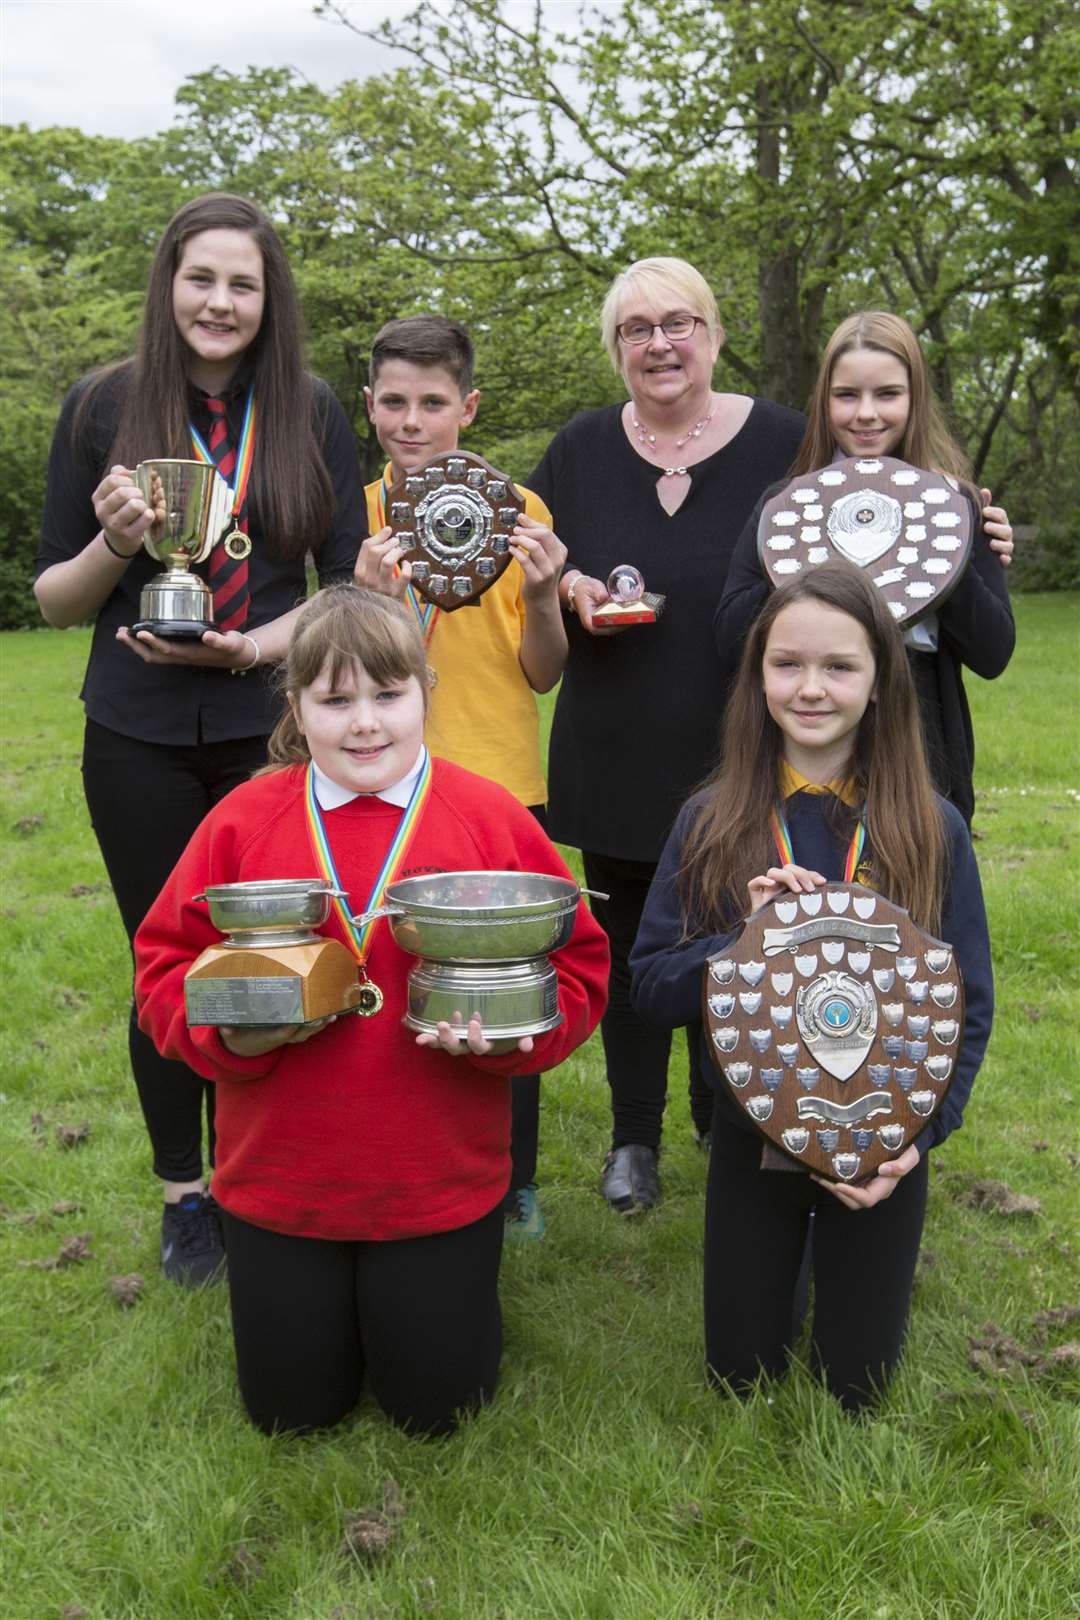 Alana Ross (front, left) won the Field of Noss Quaich, the overall Caithness dialect trophy and also the James M Gunn Dialect Quaich for P5 and under. Other trophy winners in the section were, from left, Morven Mackenzie, Halkirk, who won the Thurso Town Improvements Cup for S3-S6, her brother Liam who won the Henrietta Munro Shield for P6, Lesley Hendry, Wick, who received the Caithness Glass Paperweight Trophy for adults, Lily Byrne, Thurso High School, who received the John Munro Shield for S1-S2, and Shannon May (front, right), Halkirk, who won the Omand Shield for P7. Picture: Robert MacDonald / Northern Studios